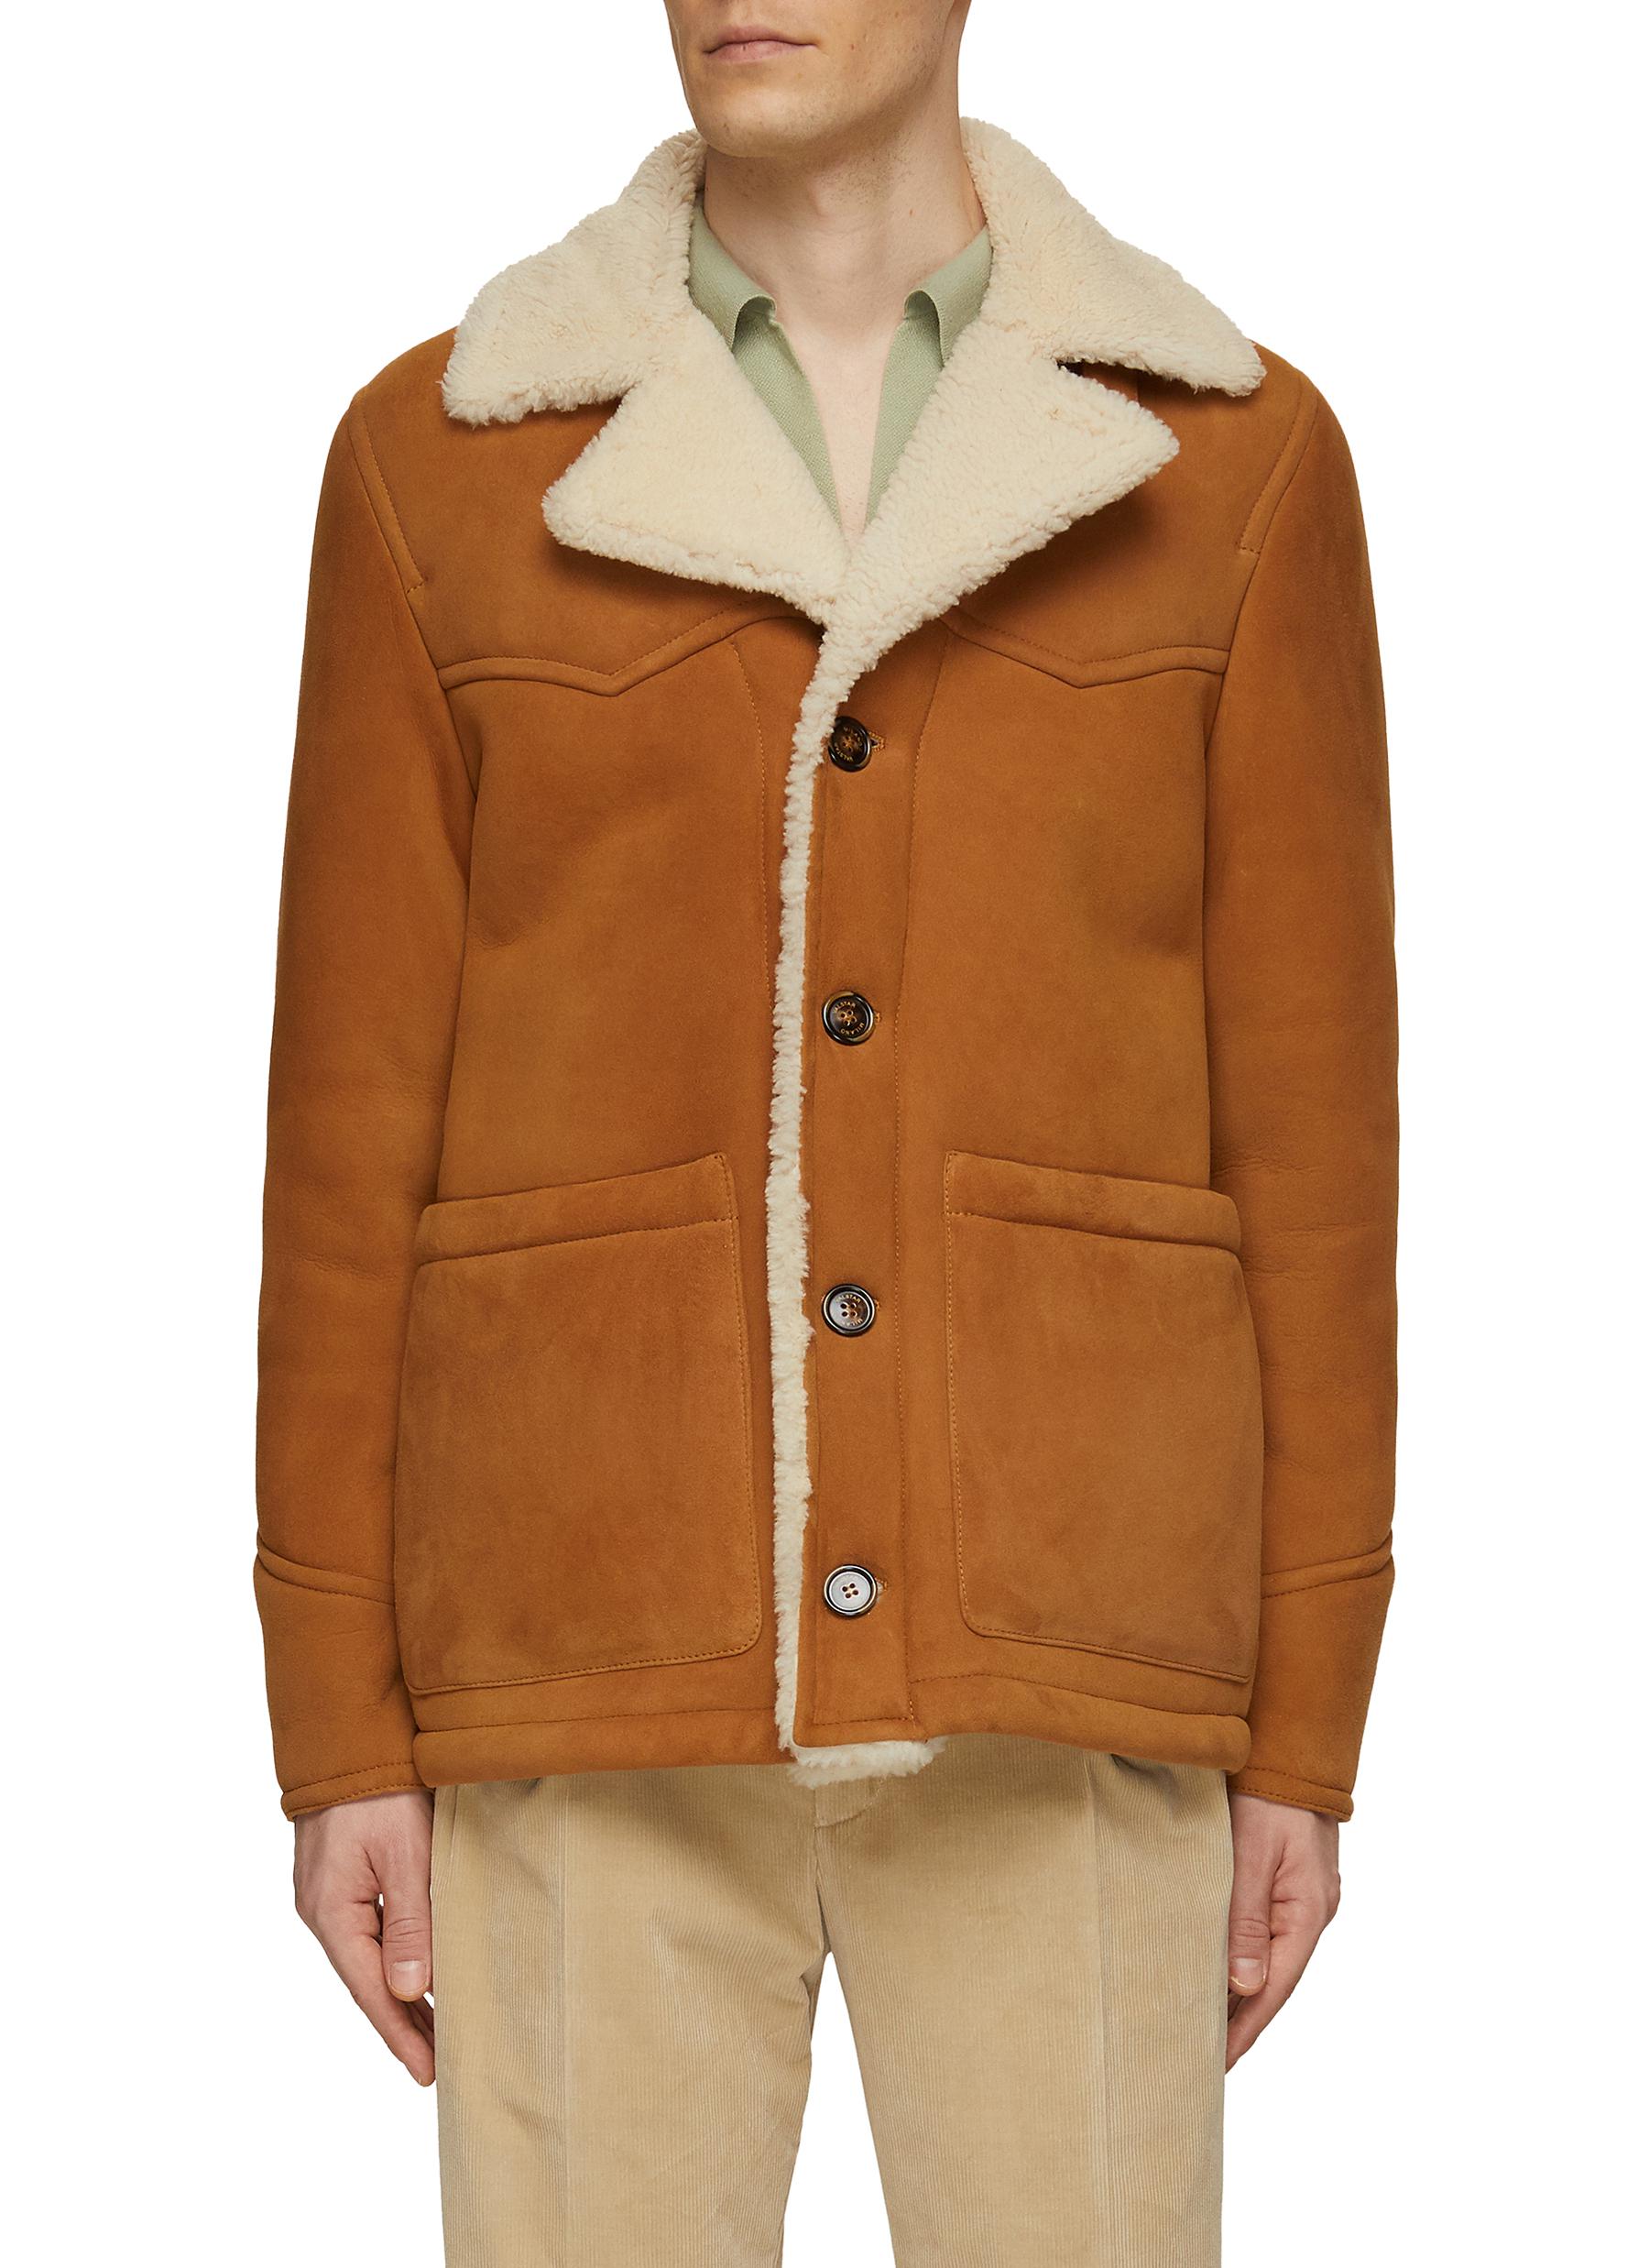 Shearling Suede Jacket